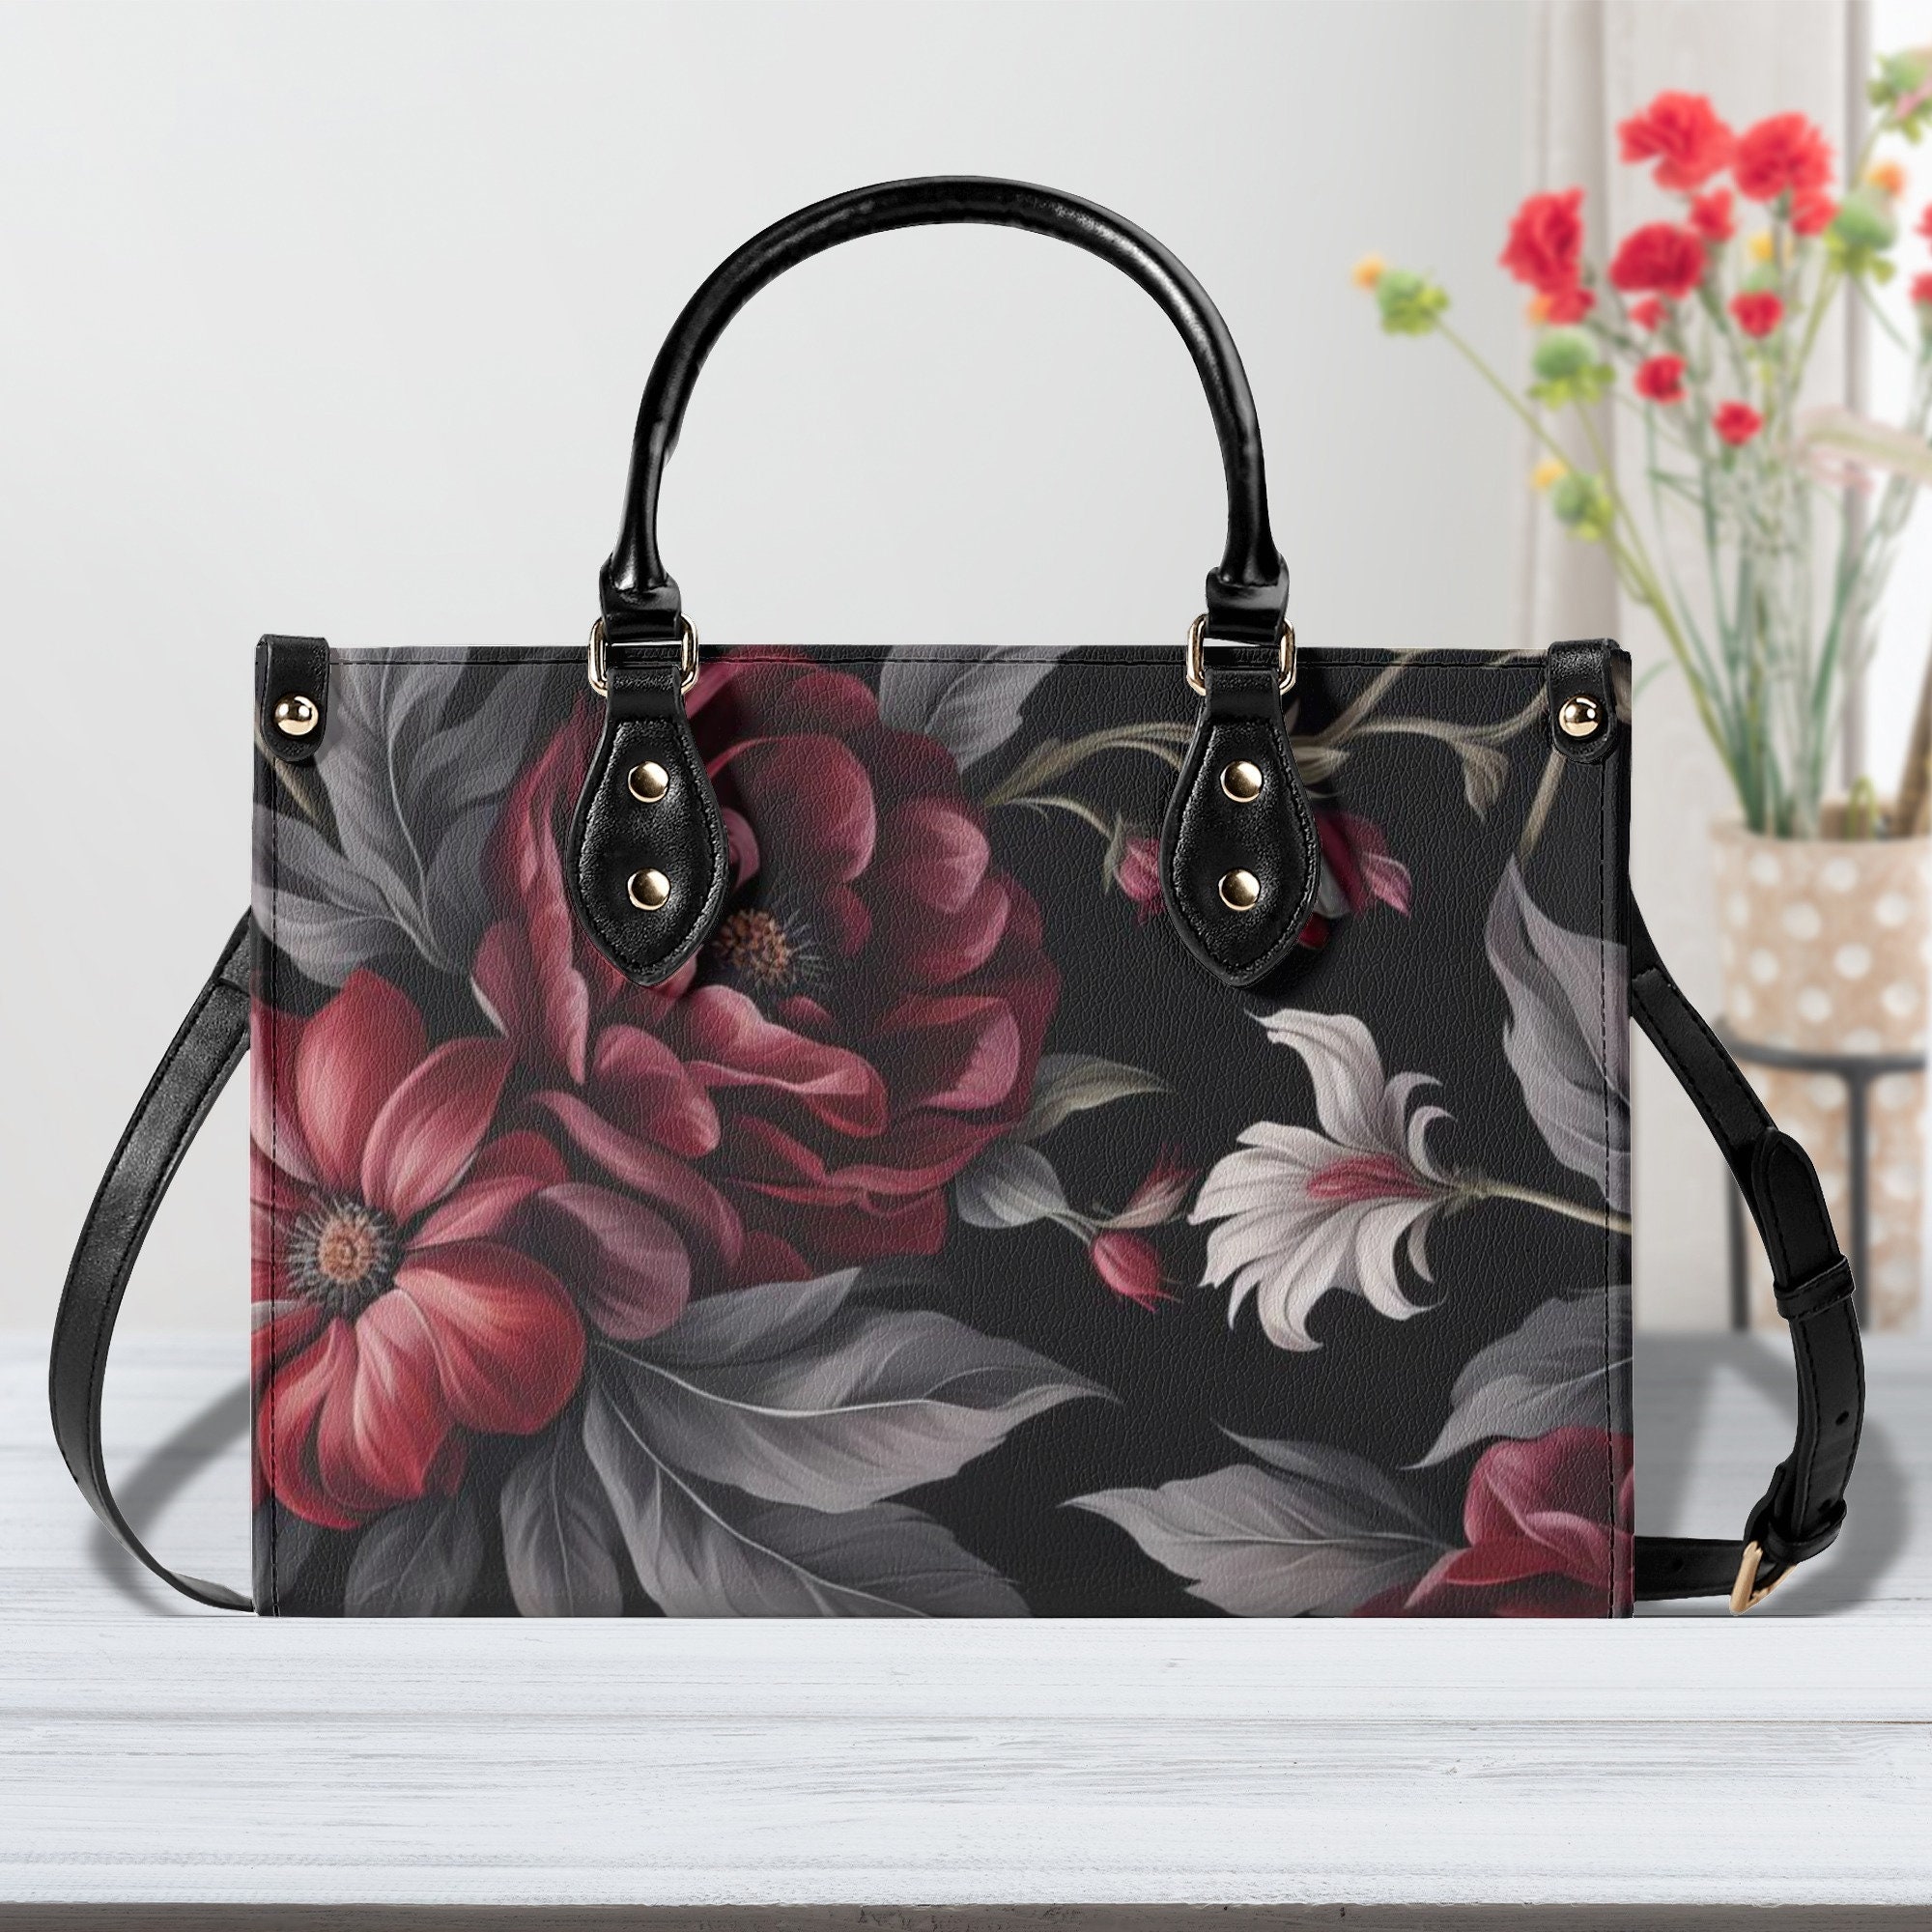 Crimson Rose - Goth Red Flowers Purse, Floral Faux Leather Hand Bag